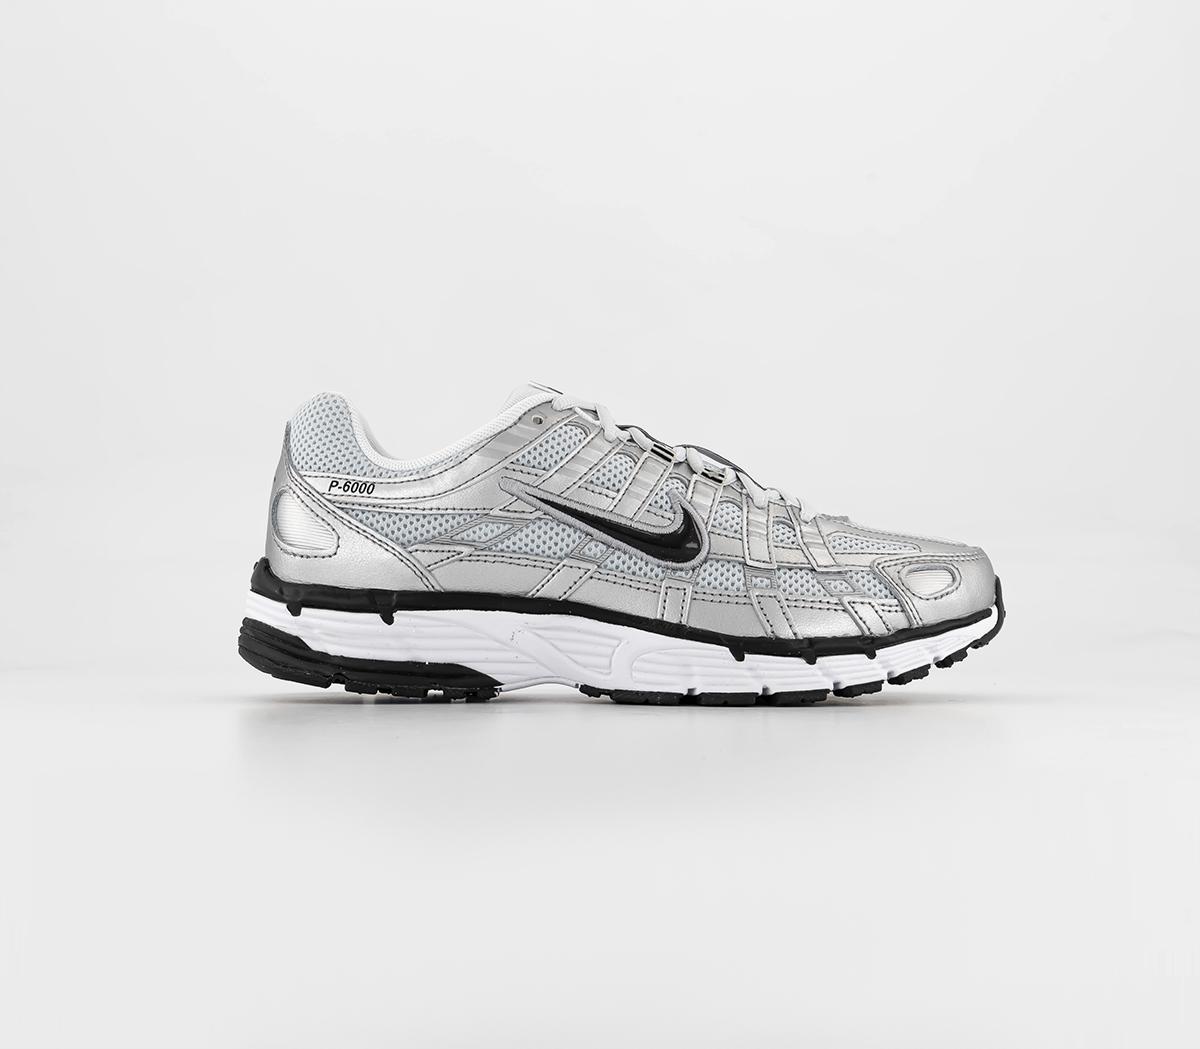 oud Anoniem aanval Nike P-6000 Trainers White Silver Black - Women's Trainers